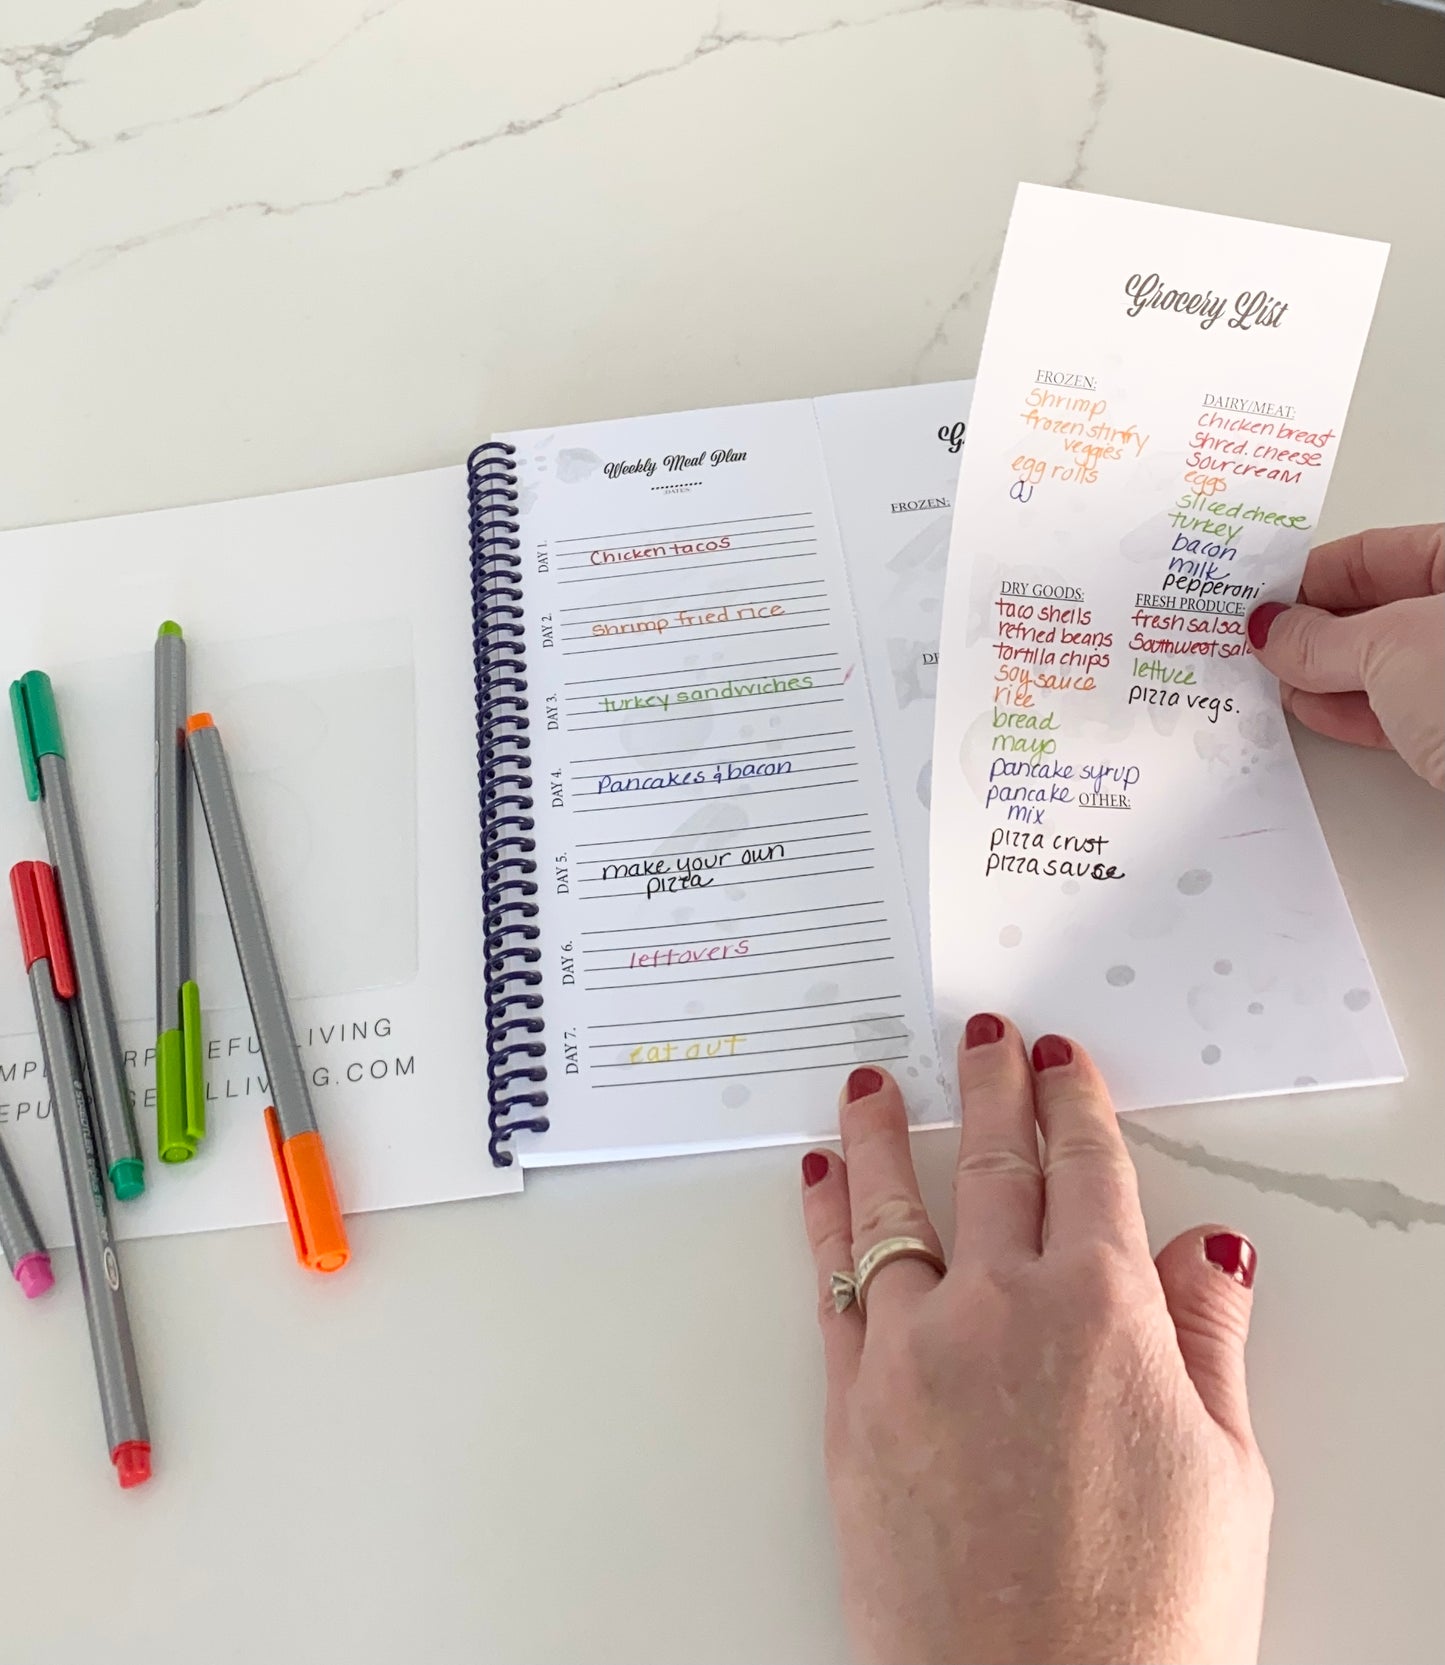 Best Selling Simple Purposeful Living 52 week meal planner meal planning spiral bound notebook with tear off grocery list.  This spiral bound food journal simplifies meal planning.